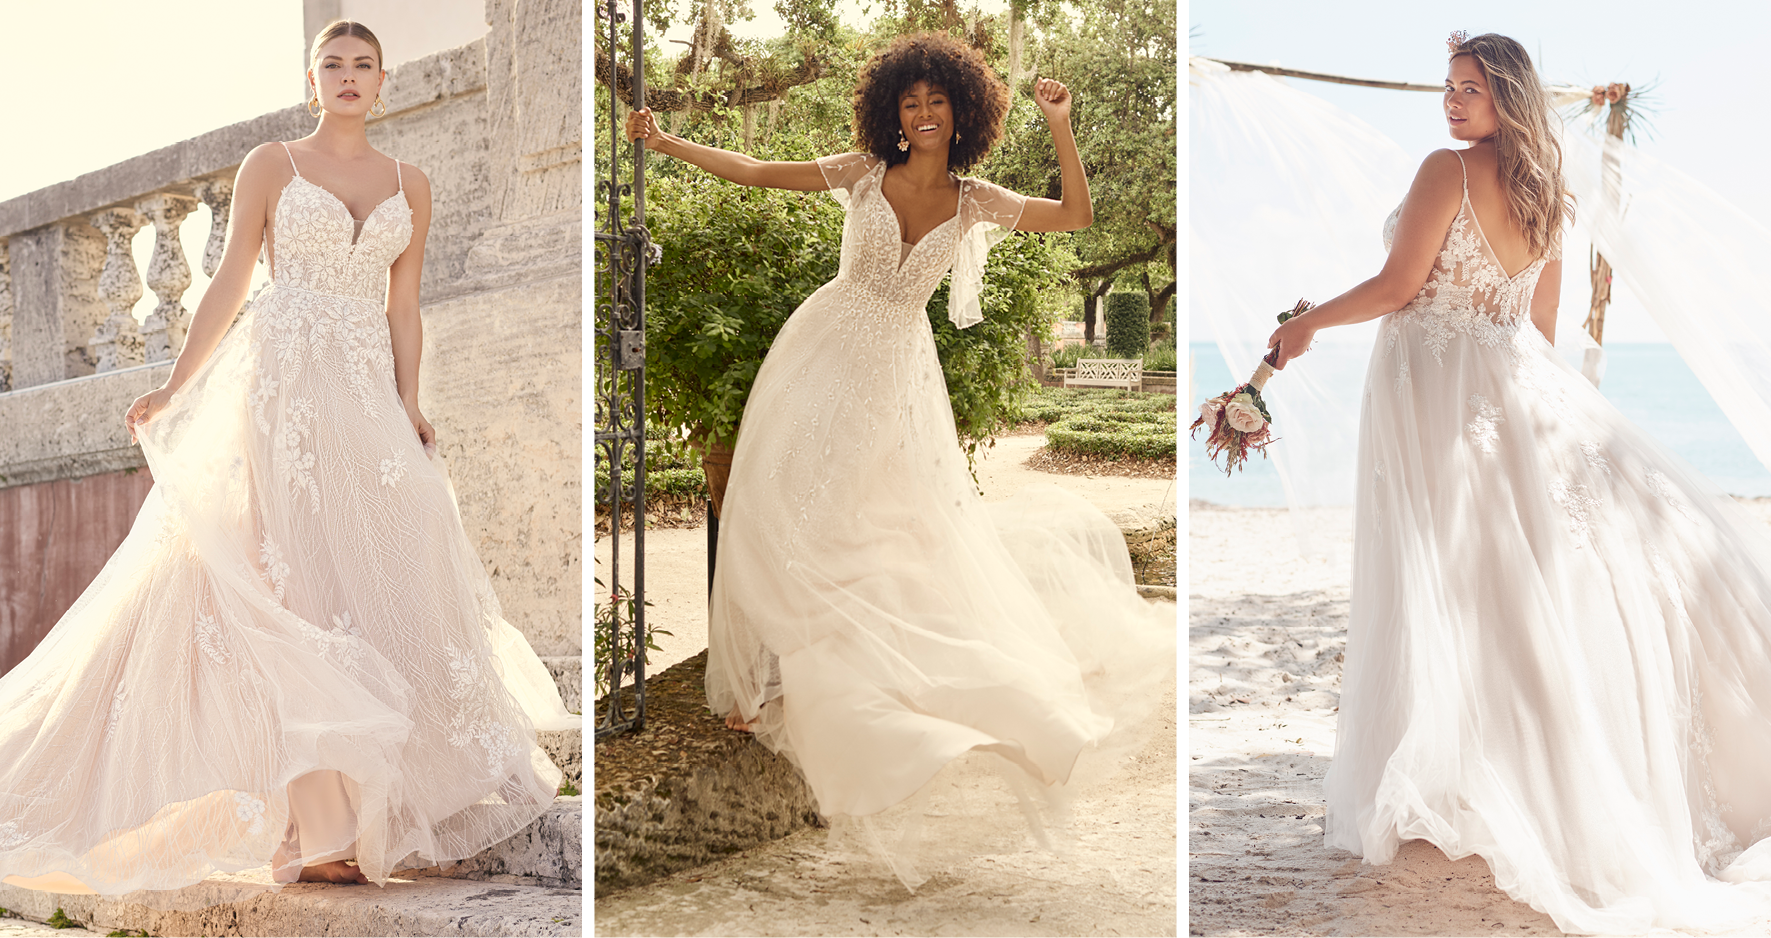 A-Line Wedding Dresses That Will Melt Your Heart